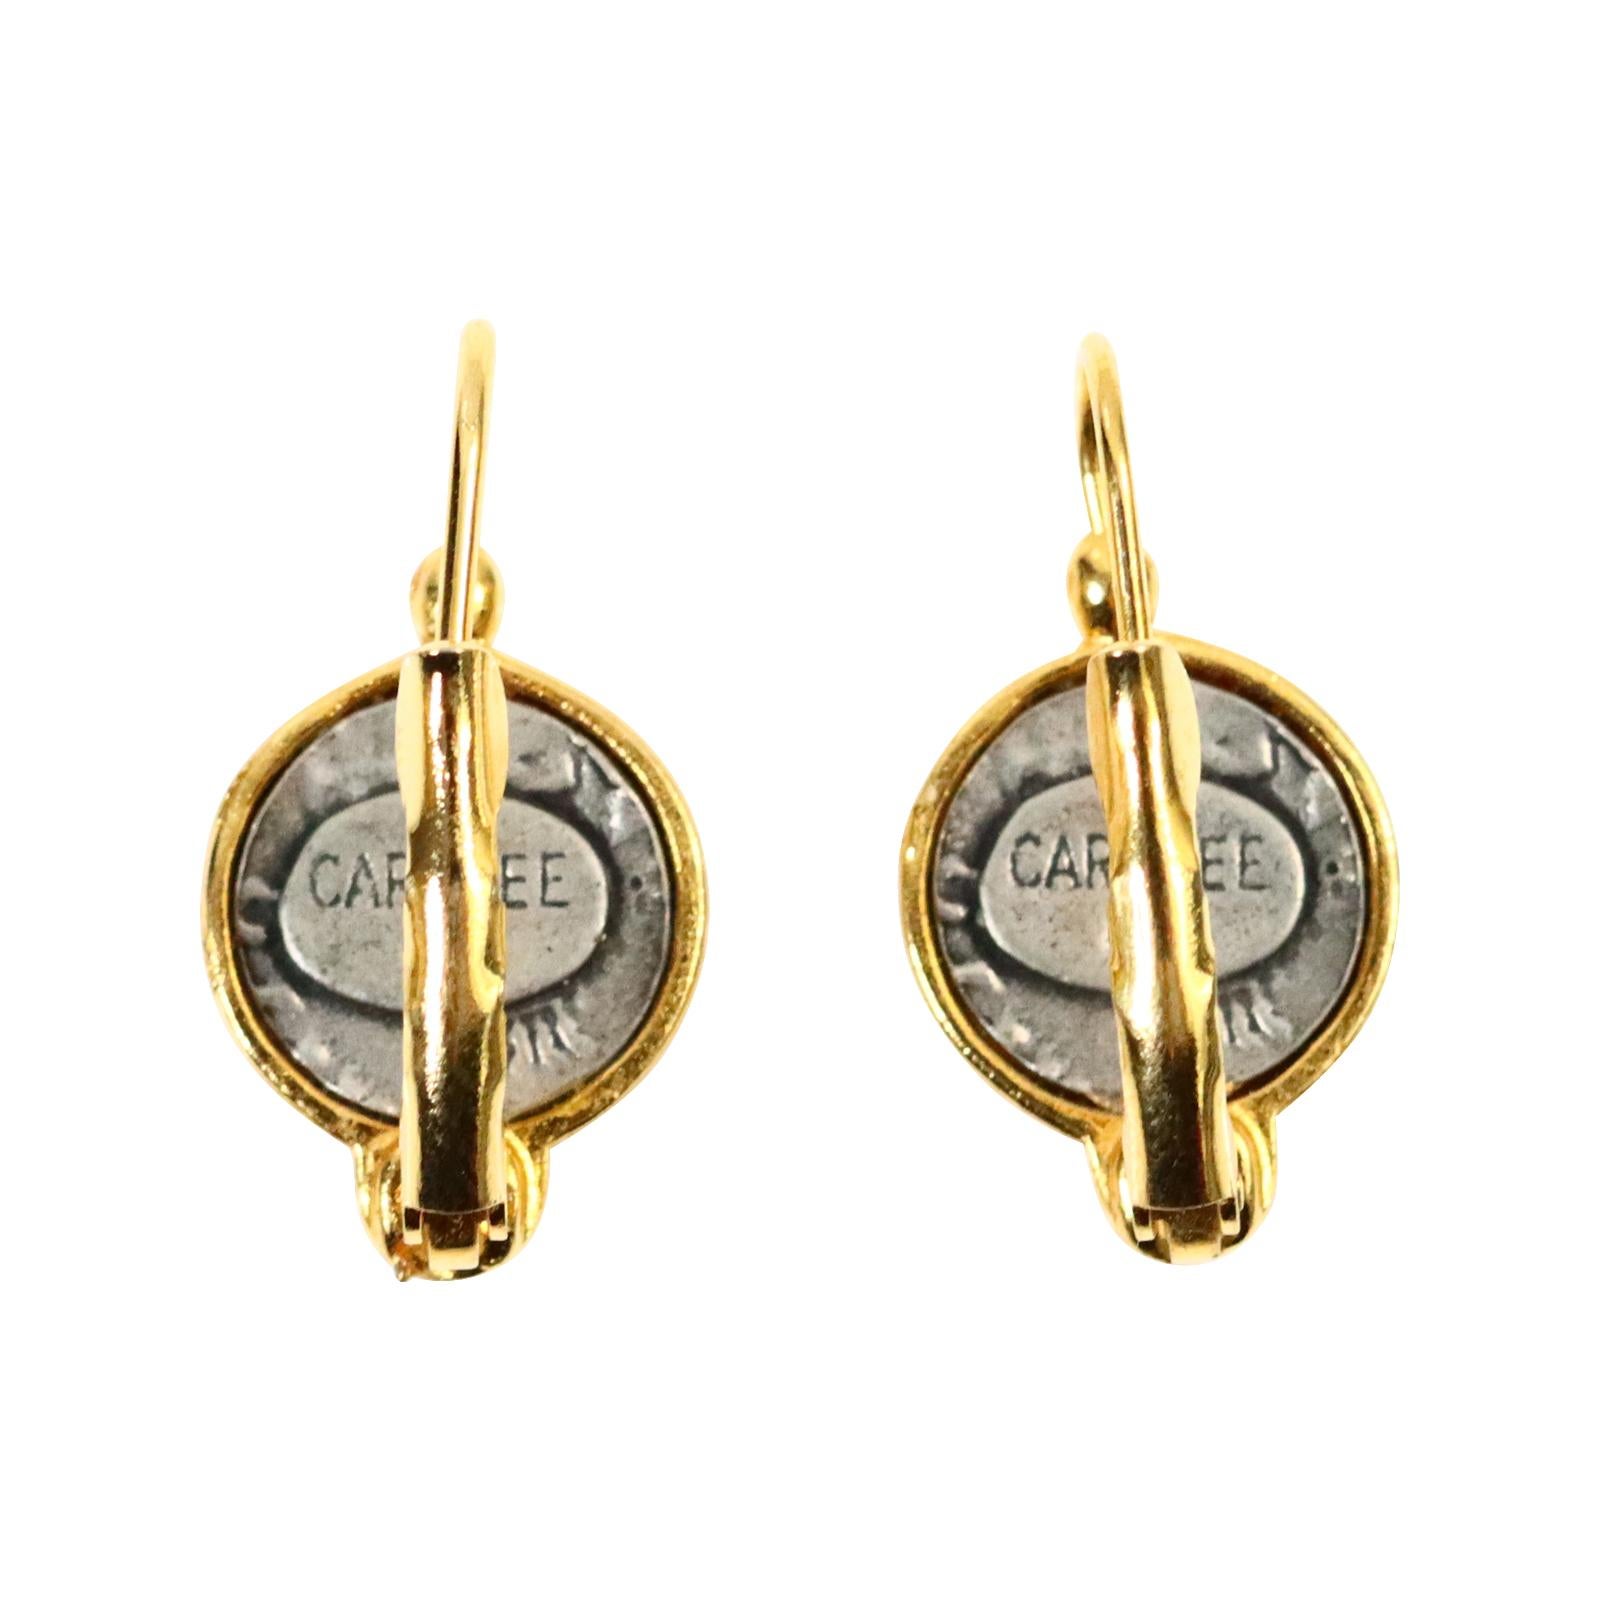 Baroque Vintage Carolee Coin Drops in Silver and Gold with Black Stone